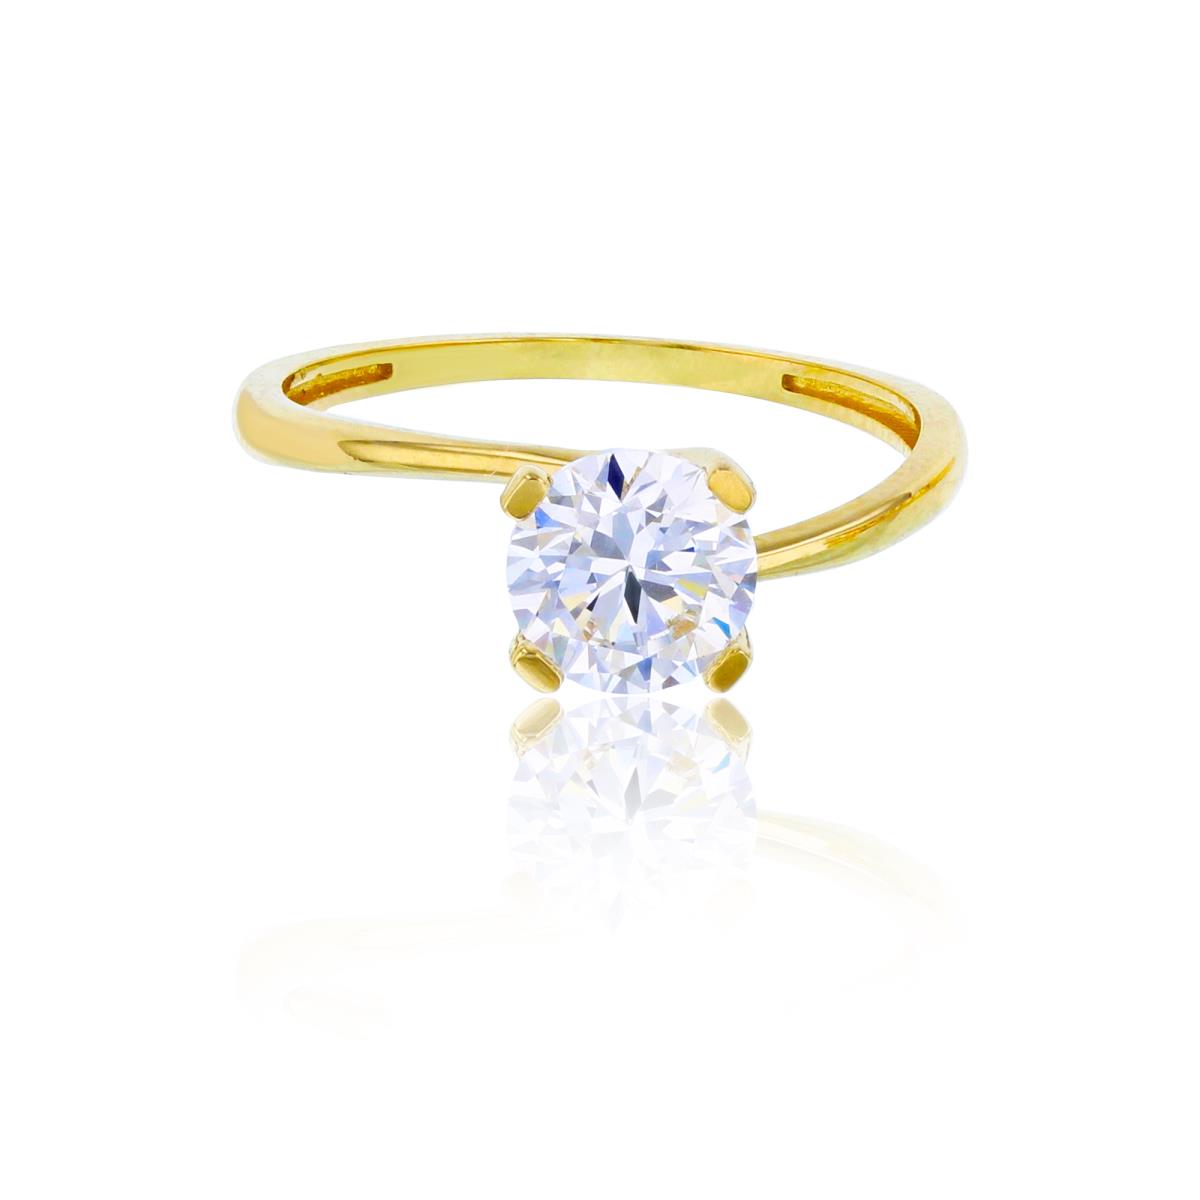 10K Yellow Gold 6.50mm Round Cut CZ High Polished Bypass Solitaire Ring